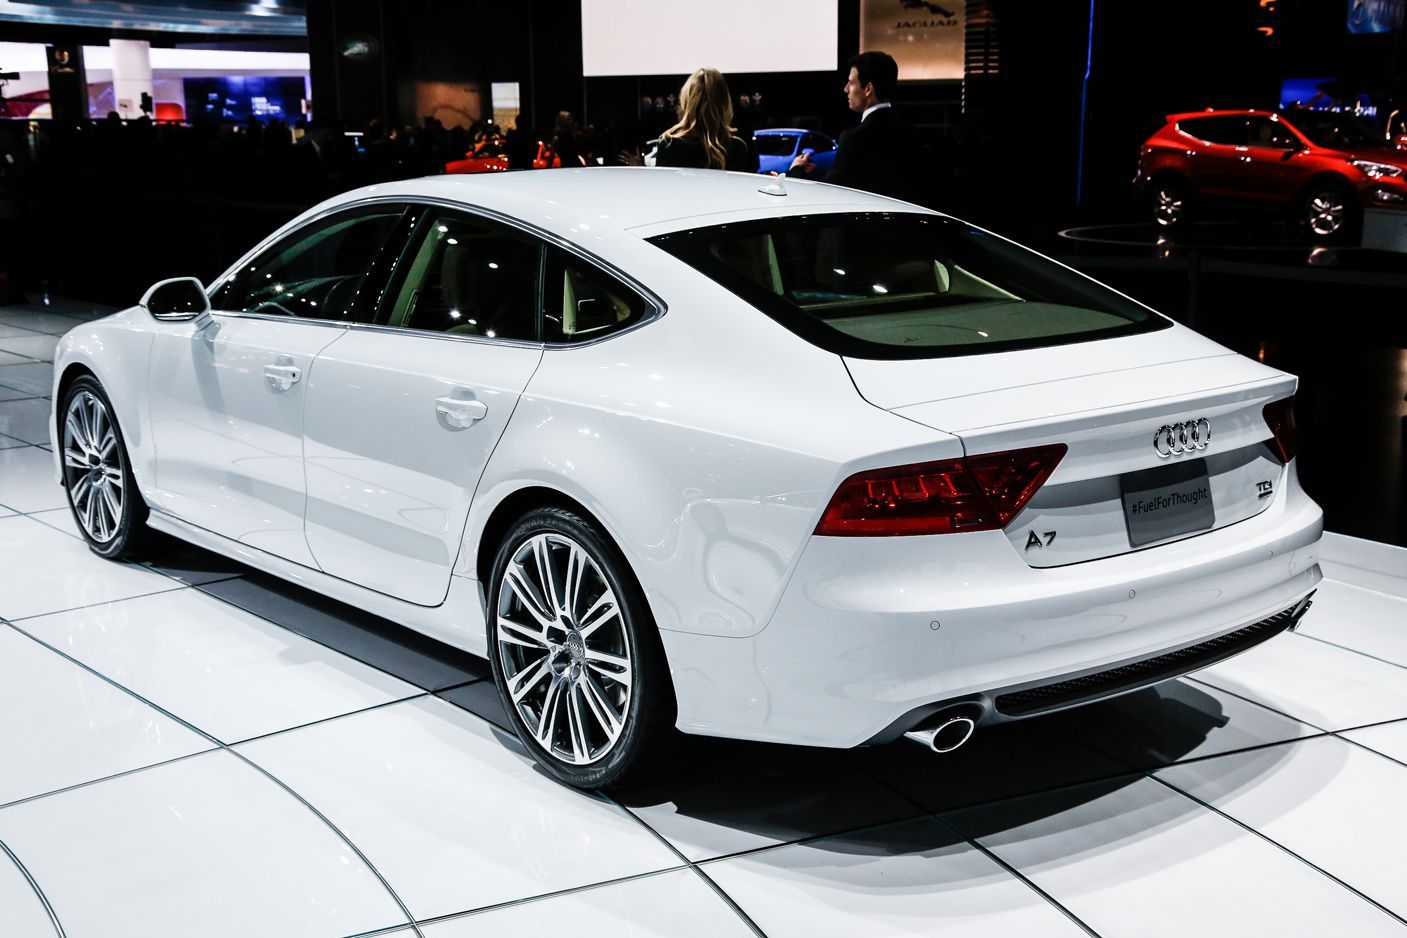 White Audi A7 Wallpapers